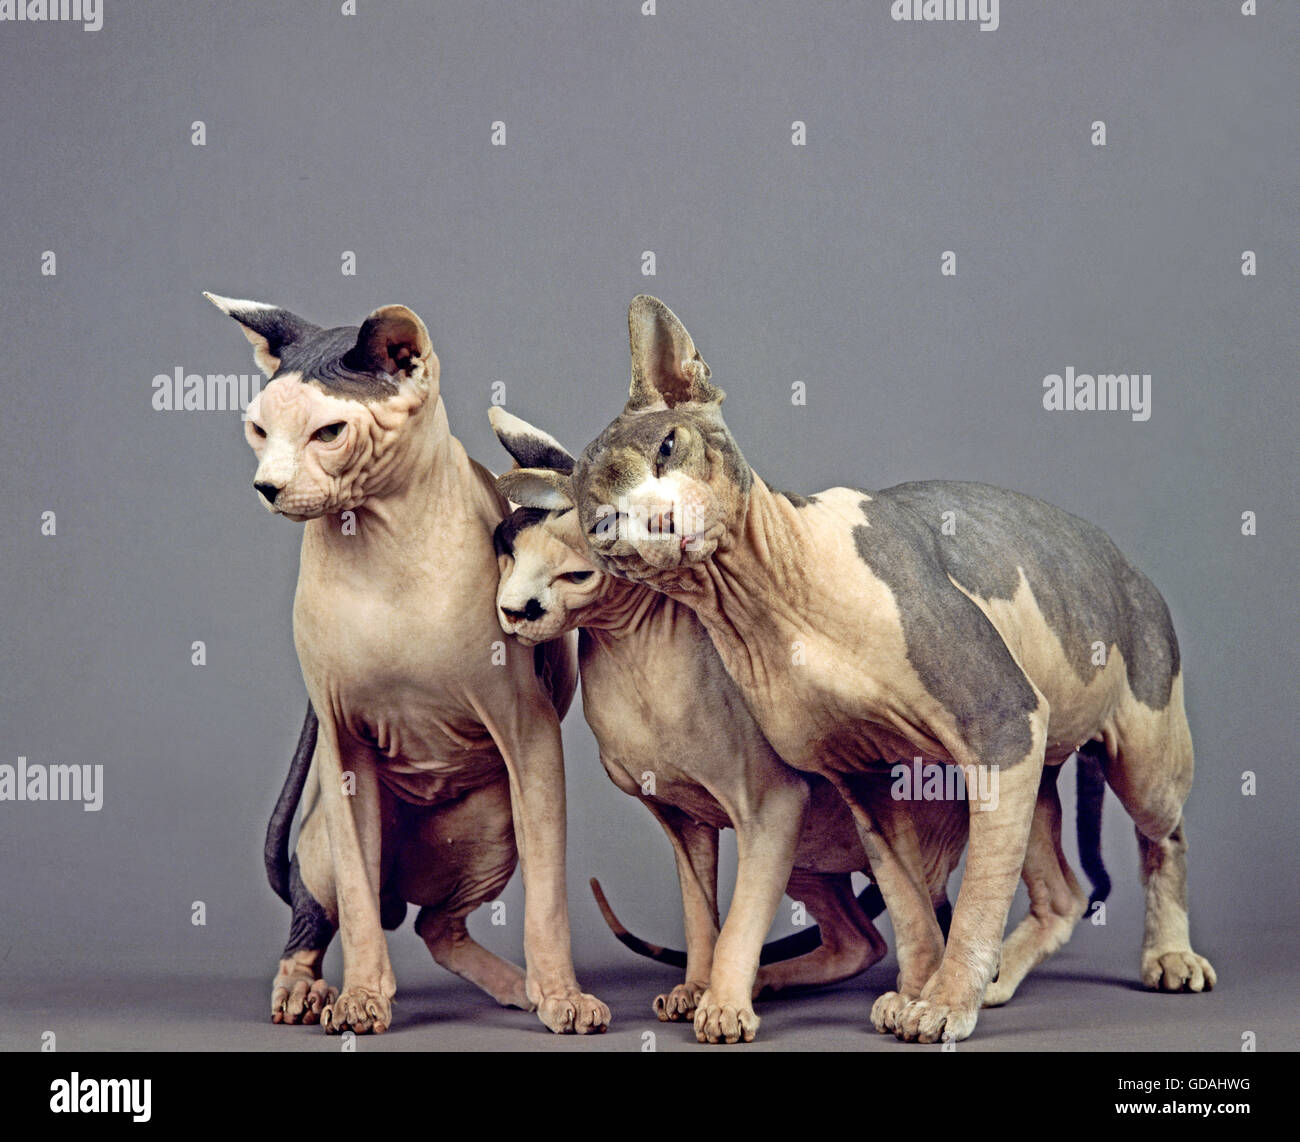 SPHYNX DOMESTIC CAT, CAT BREED WITH NO HAIR, GROUP AGAINST GREY BACKGROUND Stock Photo